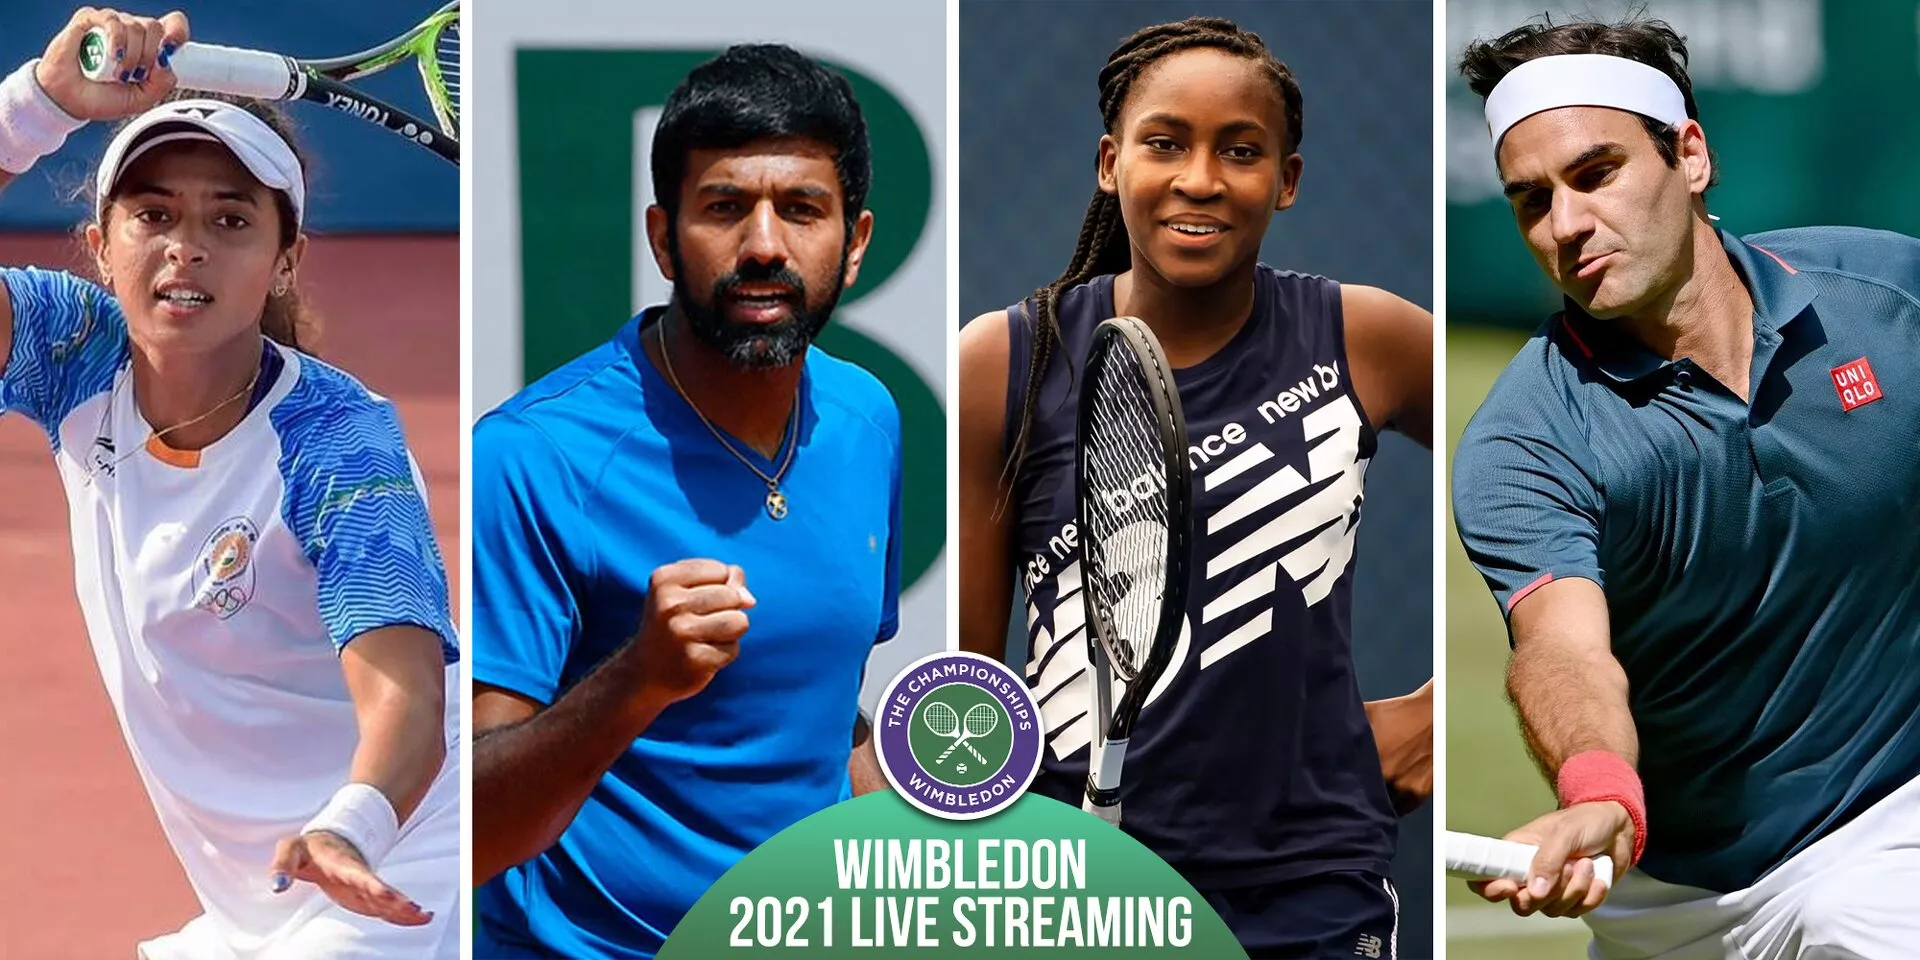 Wimbledon 2021 Day 4 live streaming and telecast